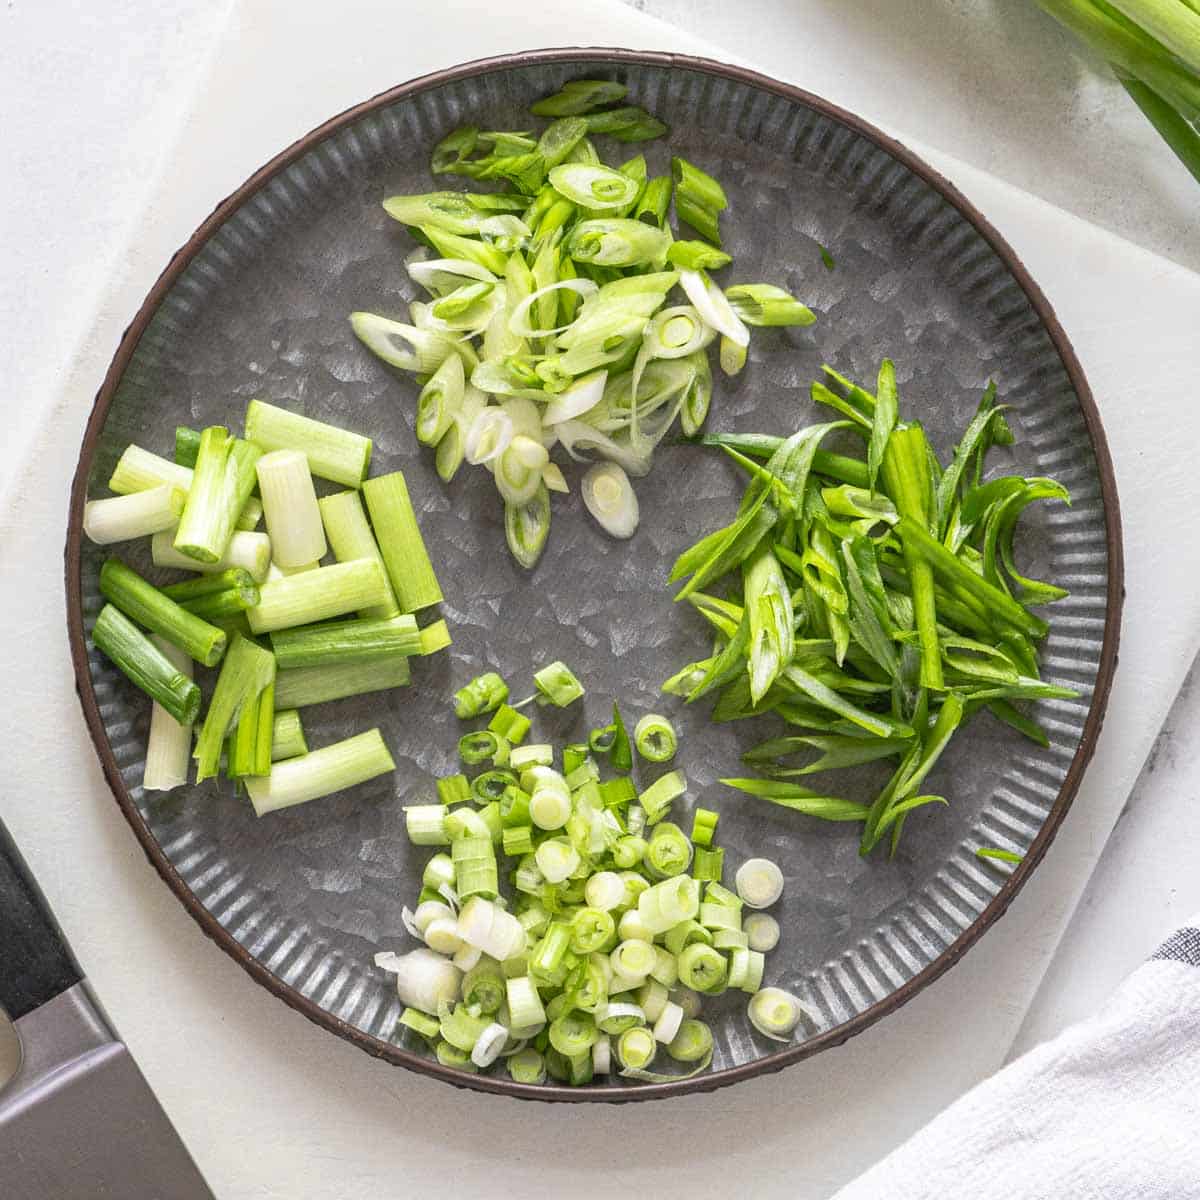 How To Cut Green Onions For Ramen 